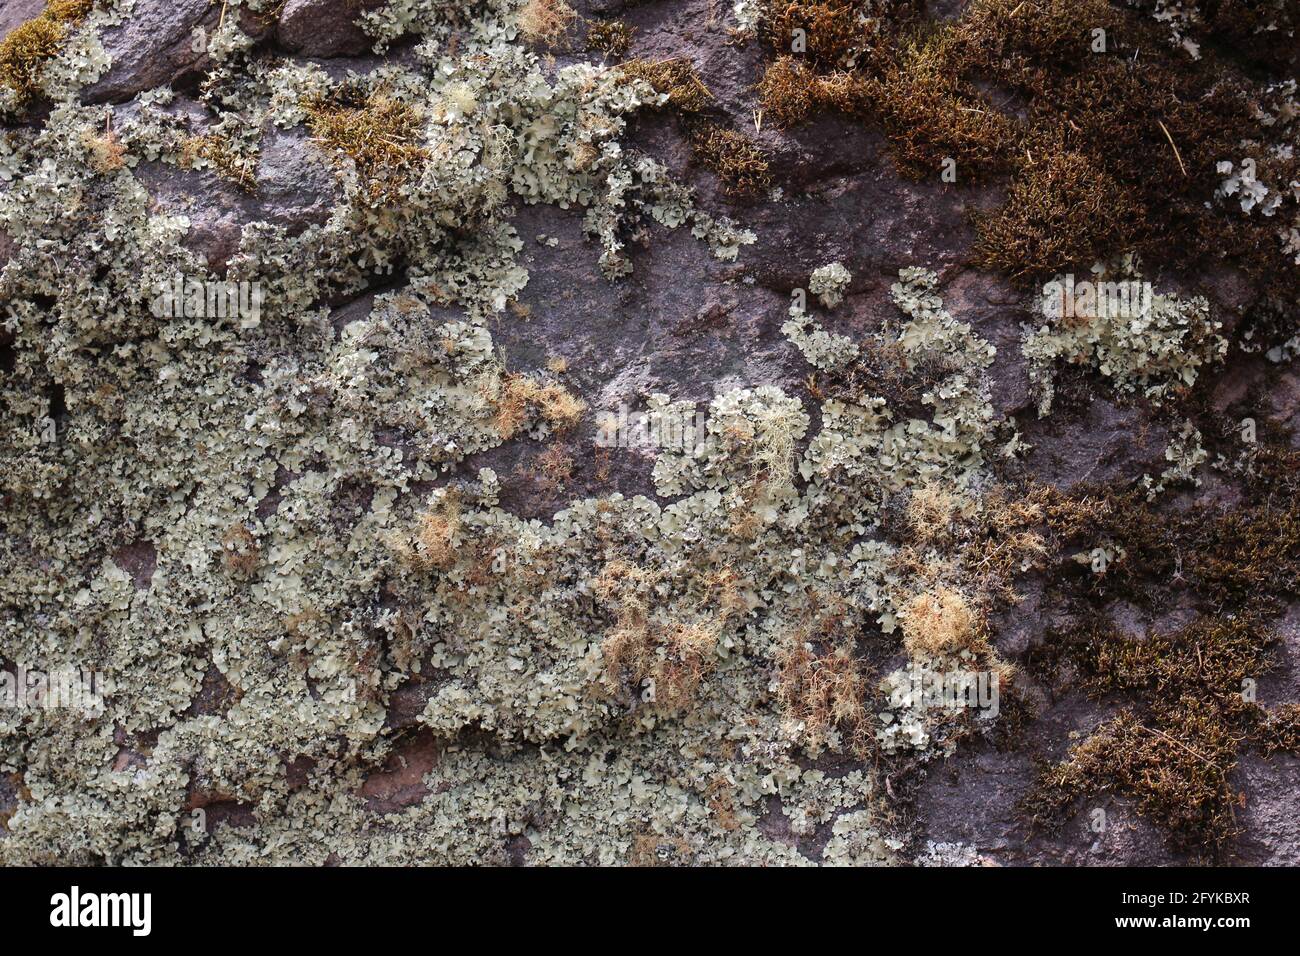 Patches of fruticose and foliose epiphytic lichens growing on a mountainside of the Patacancha Mountains in Peru Stock Photo